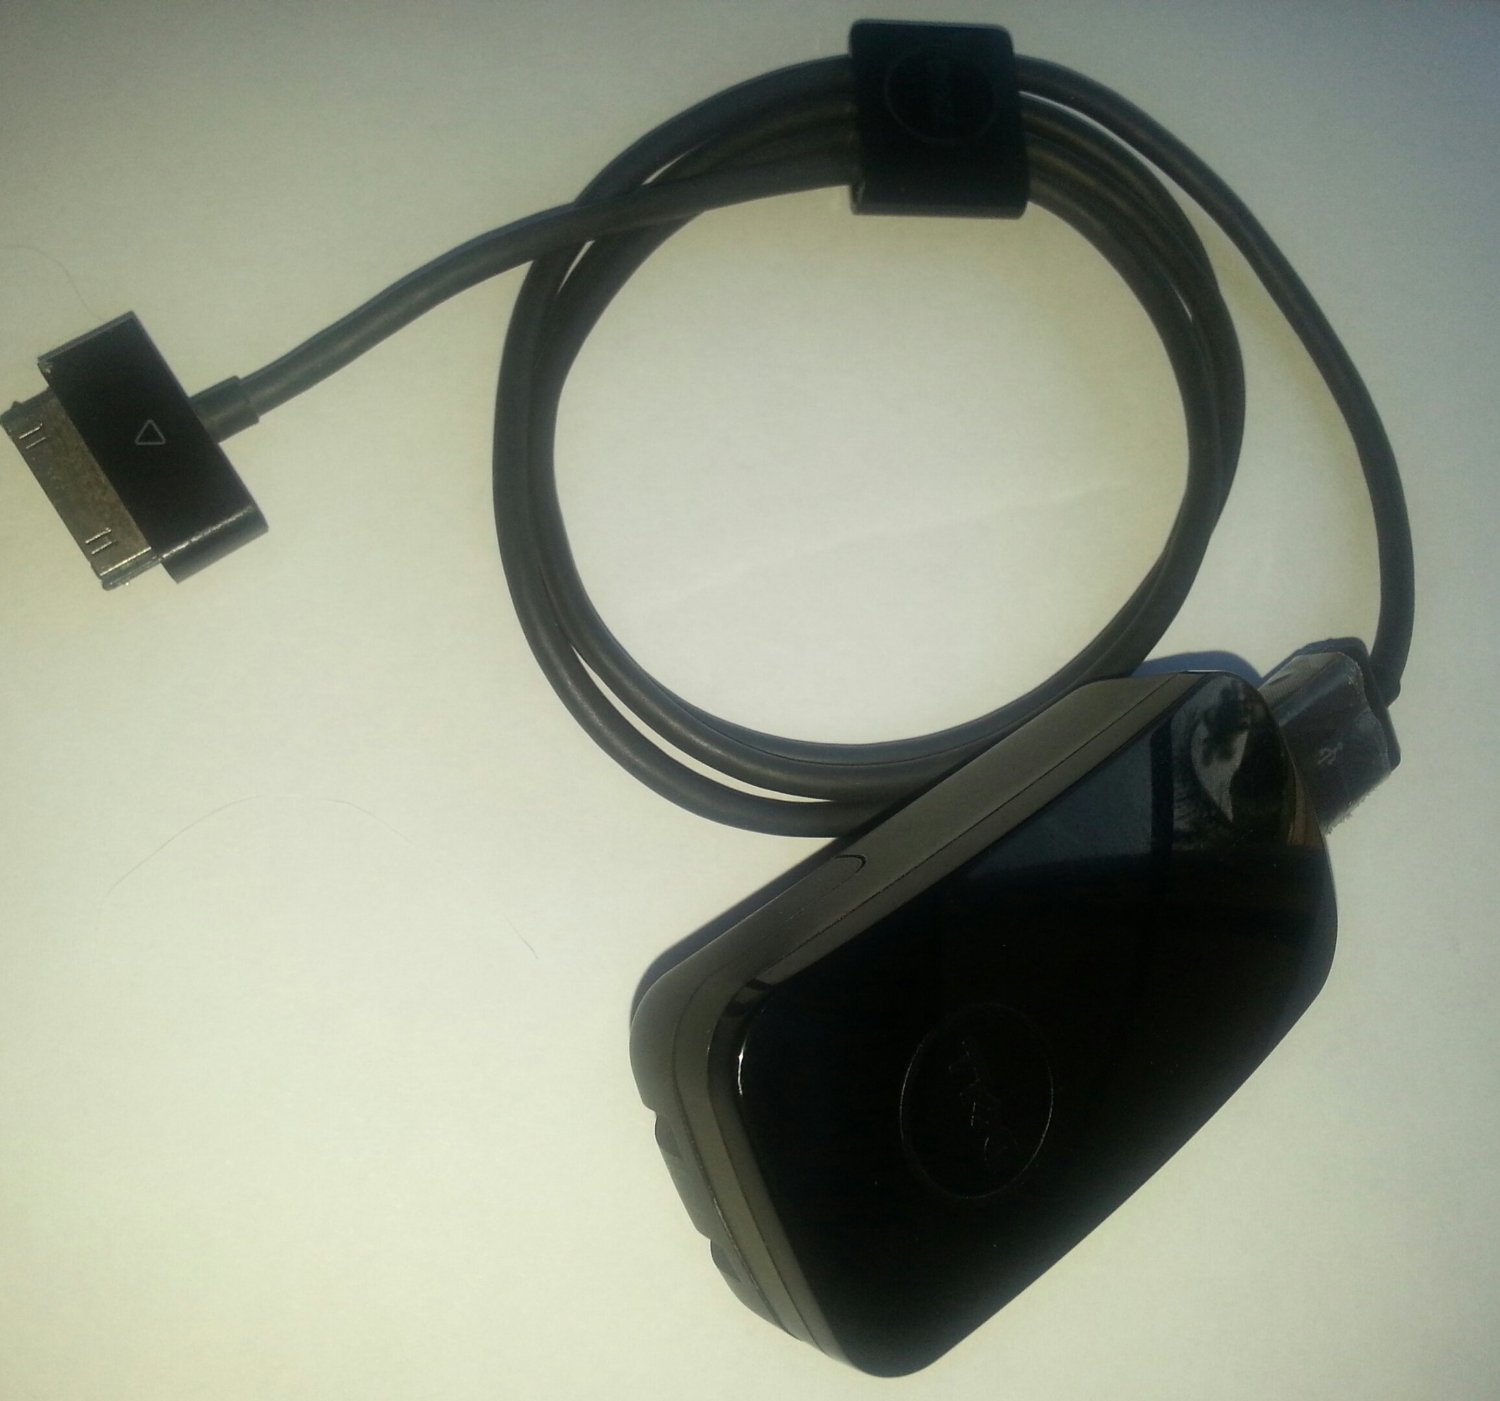 USB Sync & Charging Cable for Dell Streak 5 and Dell Streak 7